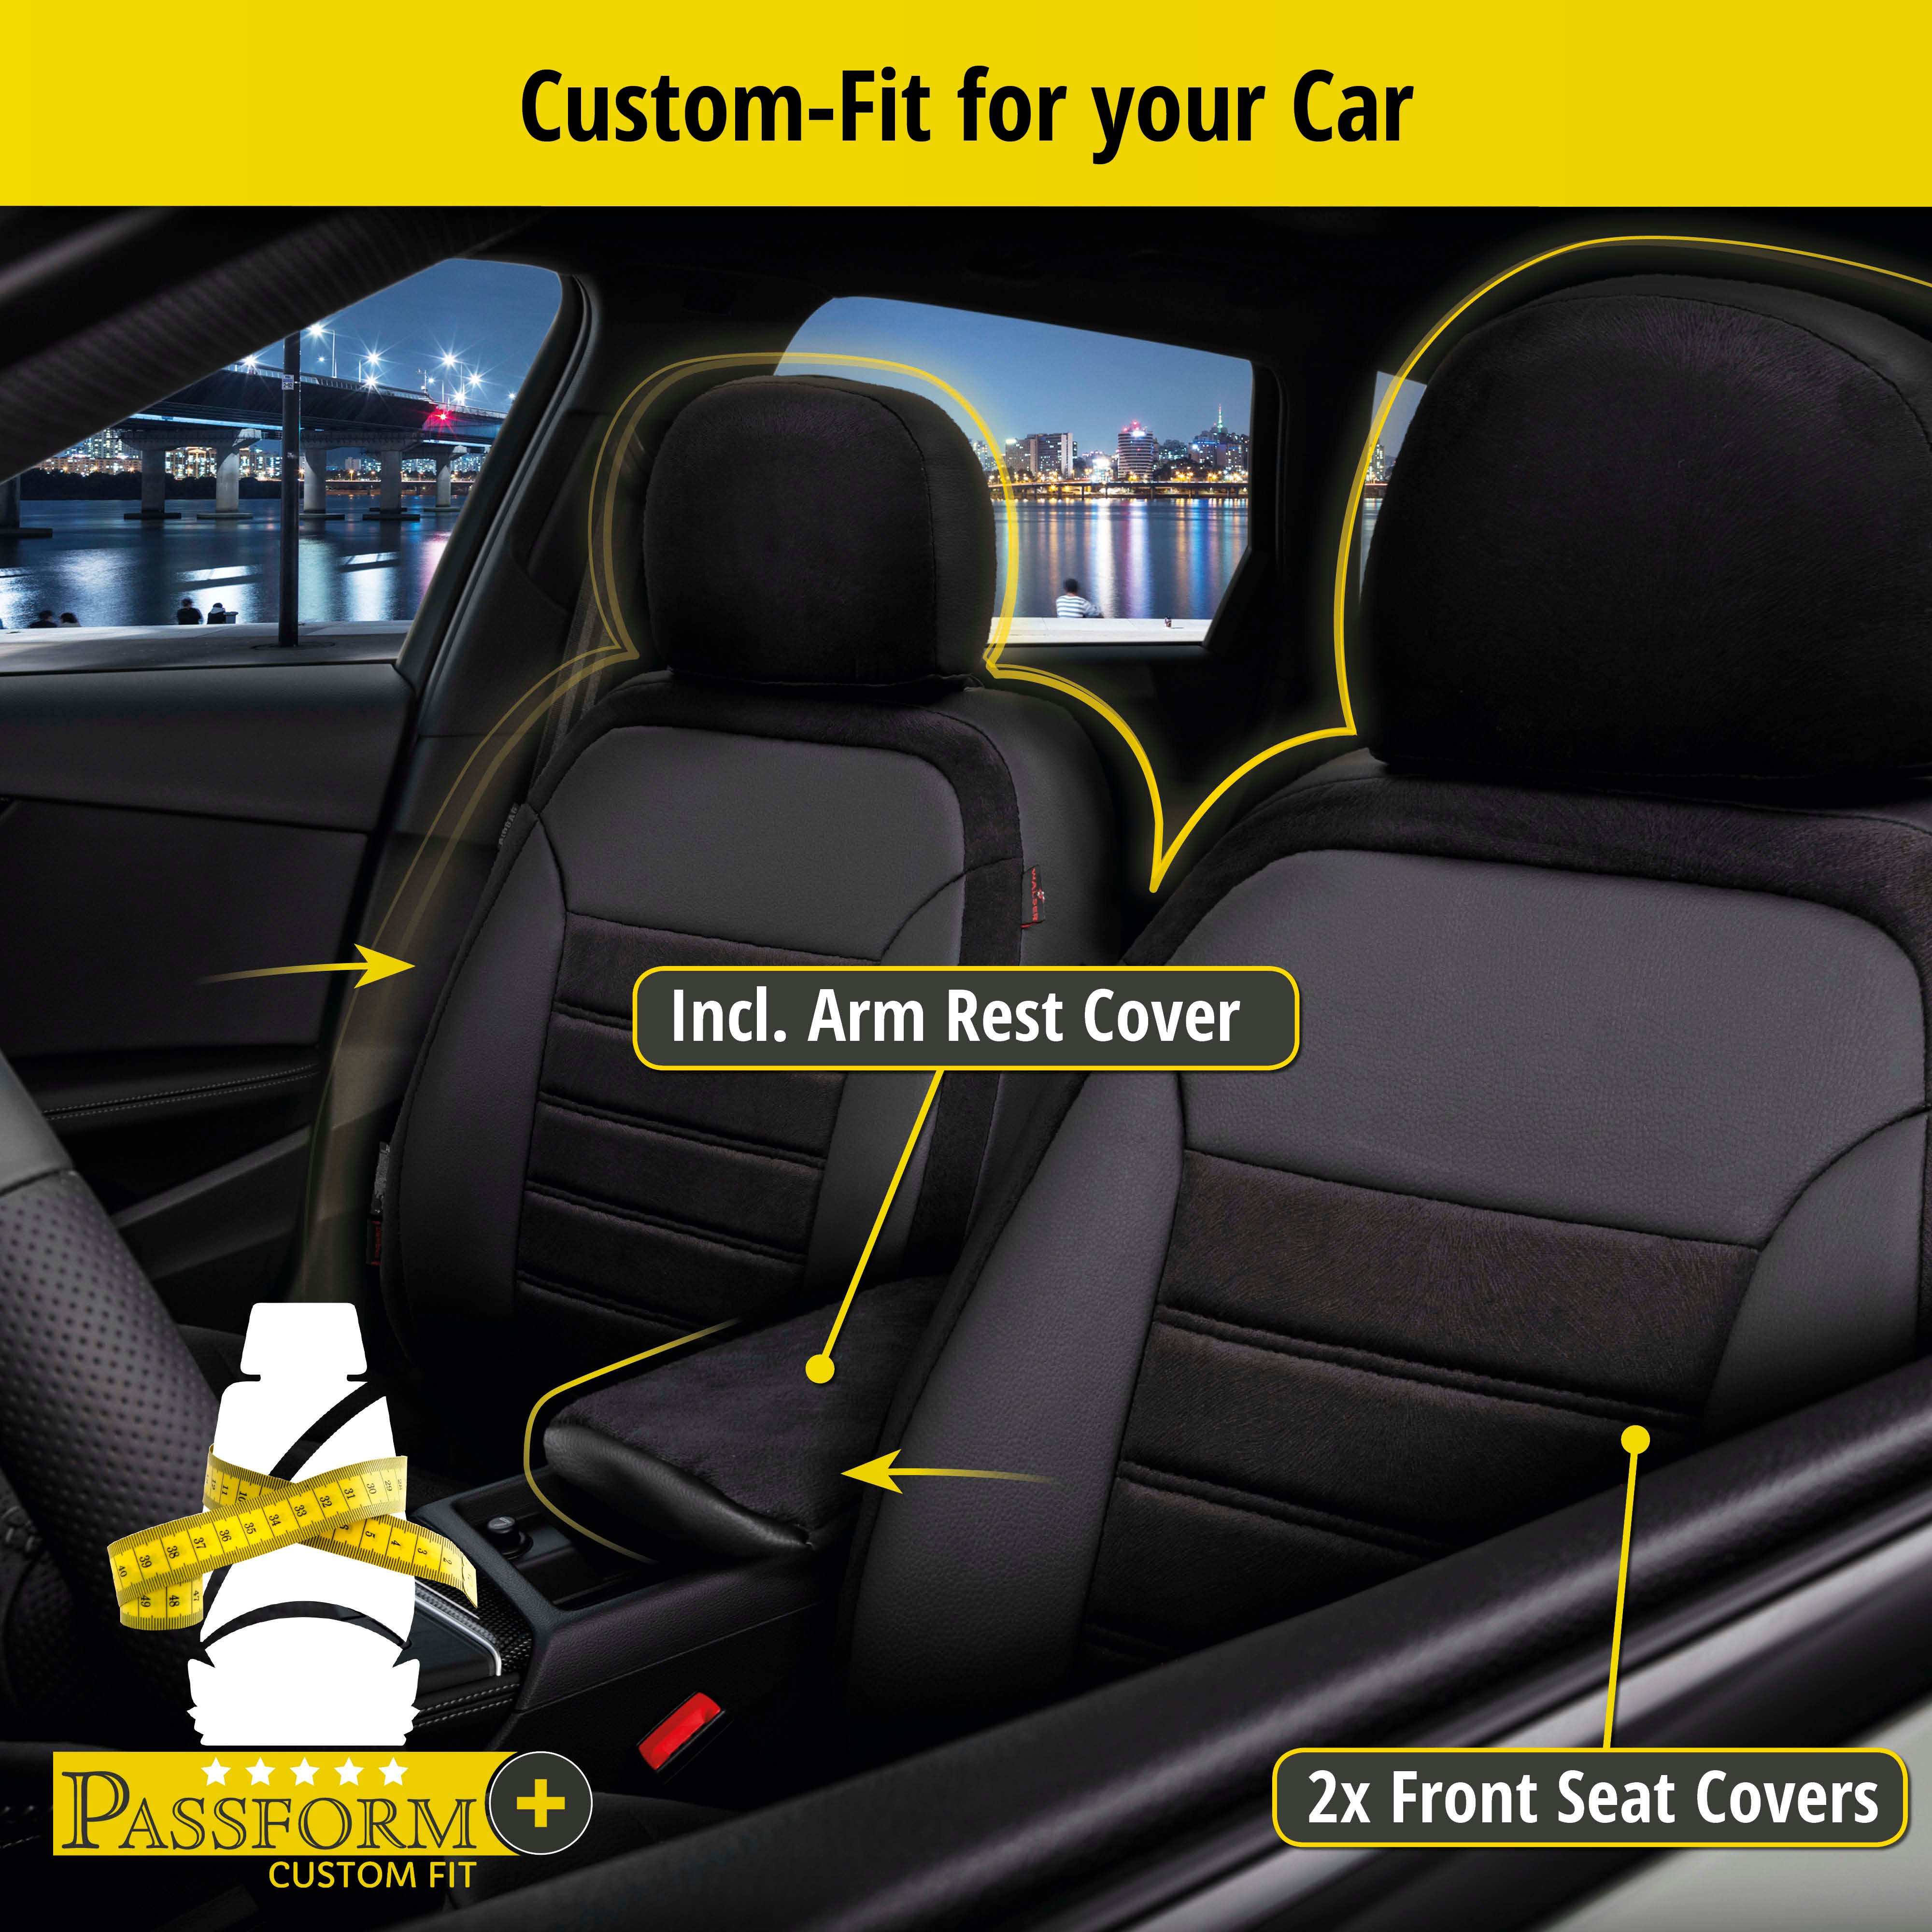 Seat Cover Bari for VW Passat Variant (365) 08/2010-12/2015, 2 seat covers for normal seats